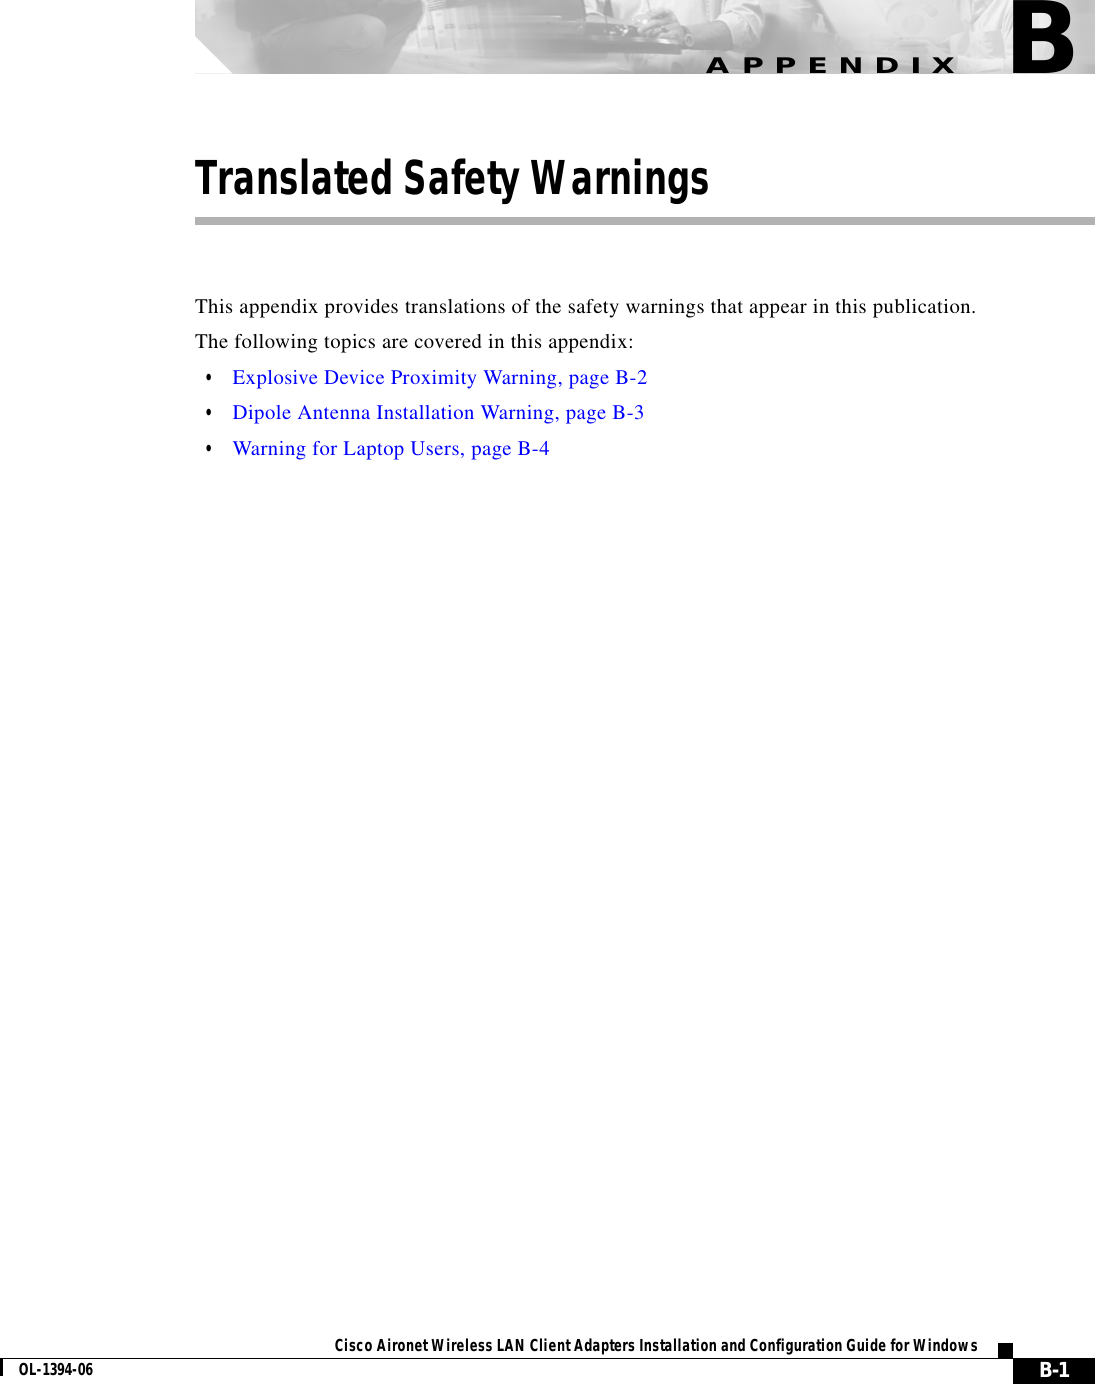 B-1Cisco Aironet Wireless LAN Client Adapters Installation and Configuration Guide for WindowsOL-1394-06APPENDIXBTranslated Safety WarningsThis appendix provides translations of the safety warnings that appear in this publication.The following topics are covered in this appendix:•Explosive Device Proximity Warning, page B-2•Dipole Antenna Installation Warning, page B-3•Warning for Laptop Users, page B-4